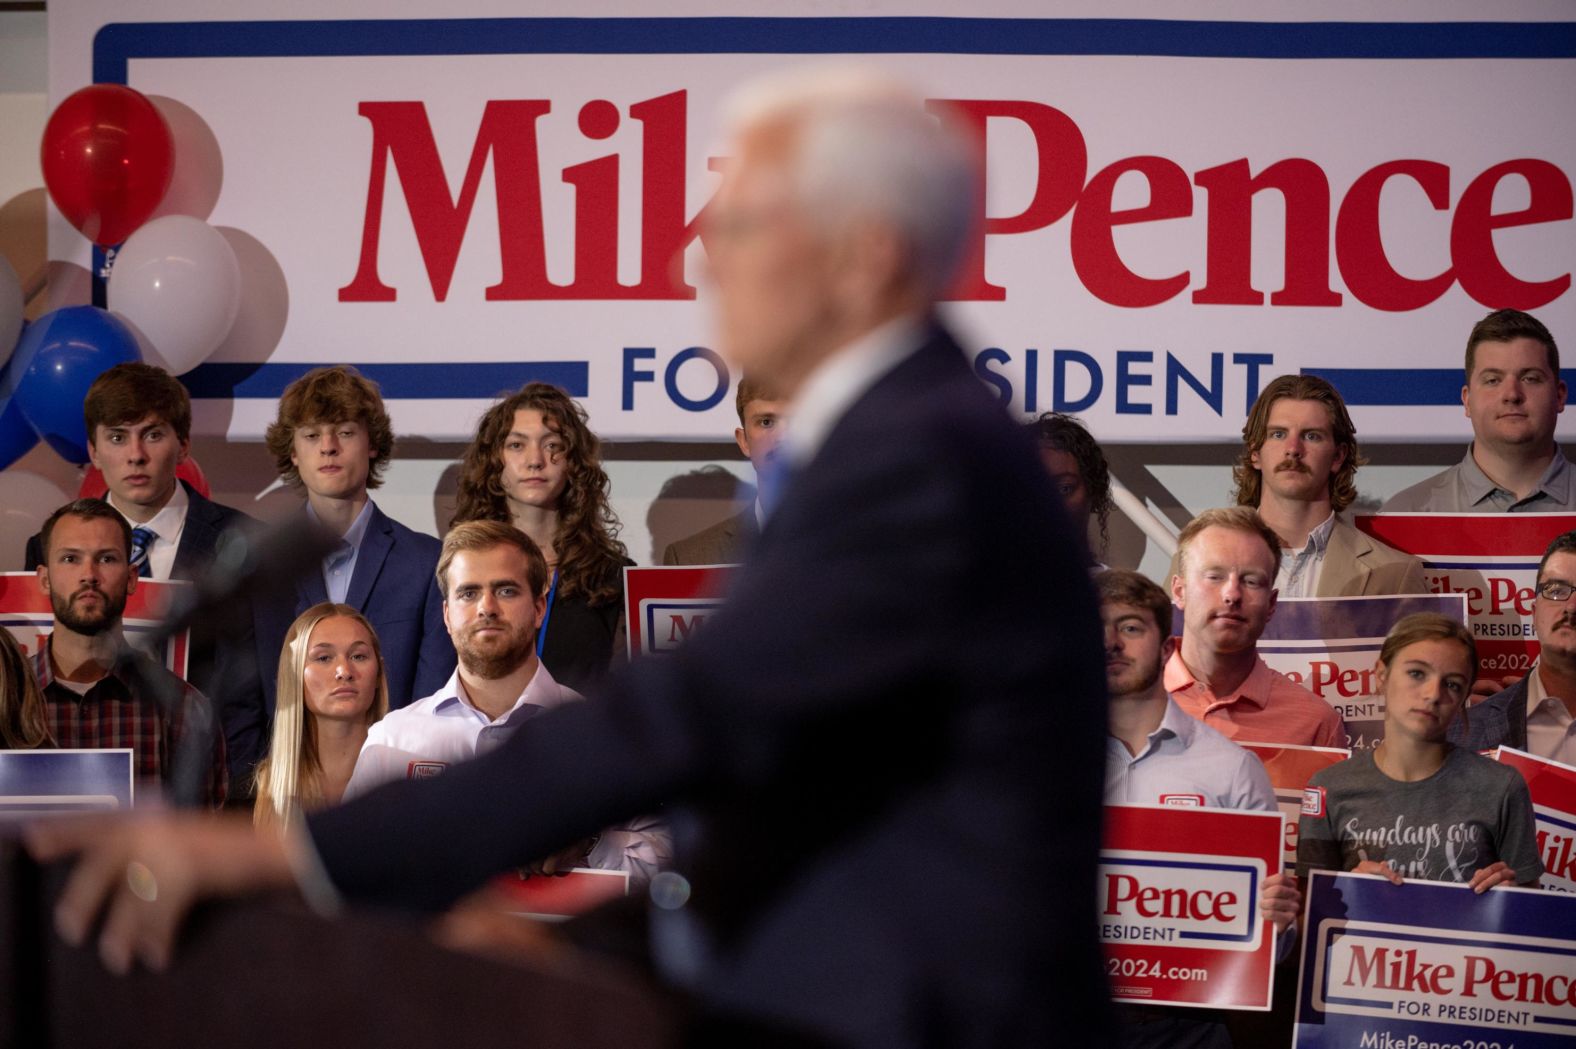 People watch as Pence <a href="https://www.cnn.com/2023/06/07/politics/pence-2024-presidential-campaign/index.html" target="_blank">announces his presidential candidacy</a> in Ankeny, Iowa, in June 2023. "The American people deserve to know, on (January 6, 2021), President Trump also demanded I choose between him and the Constitution. Now voters will be faced with the same choice. I chose the Constitution, and I always will," Pence said to applause from the crowd at Des Moines Area Community College.